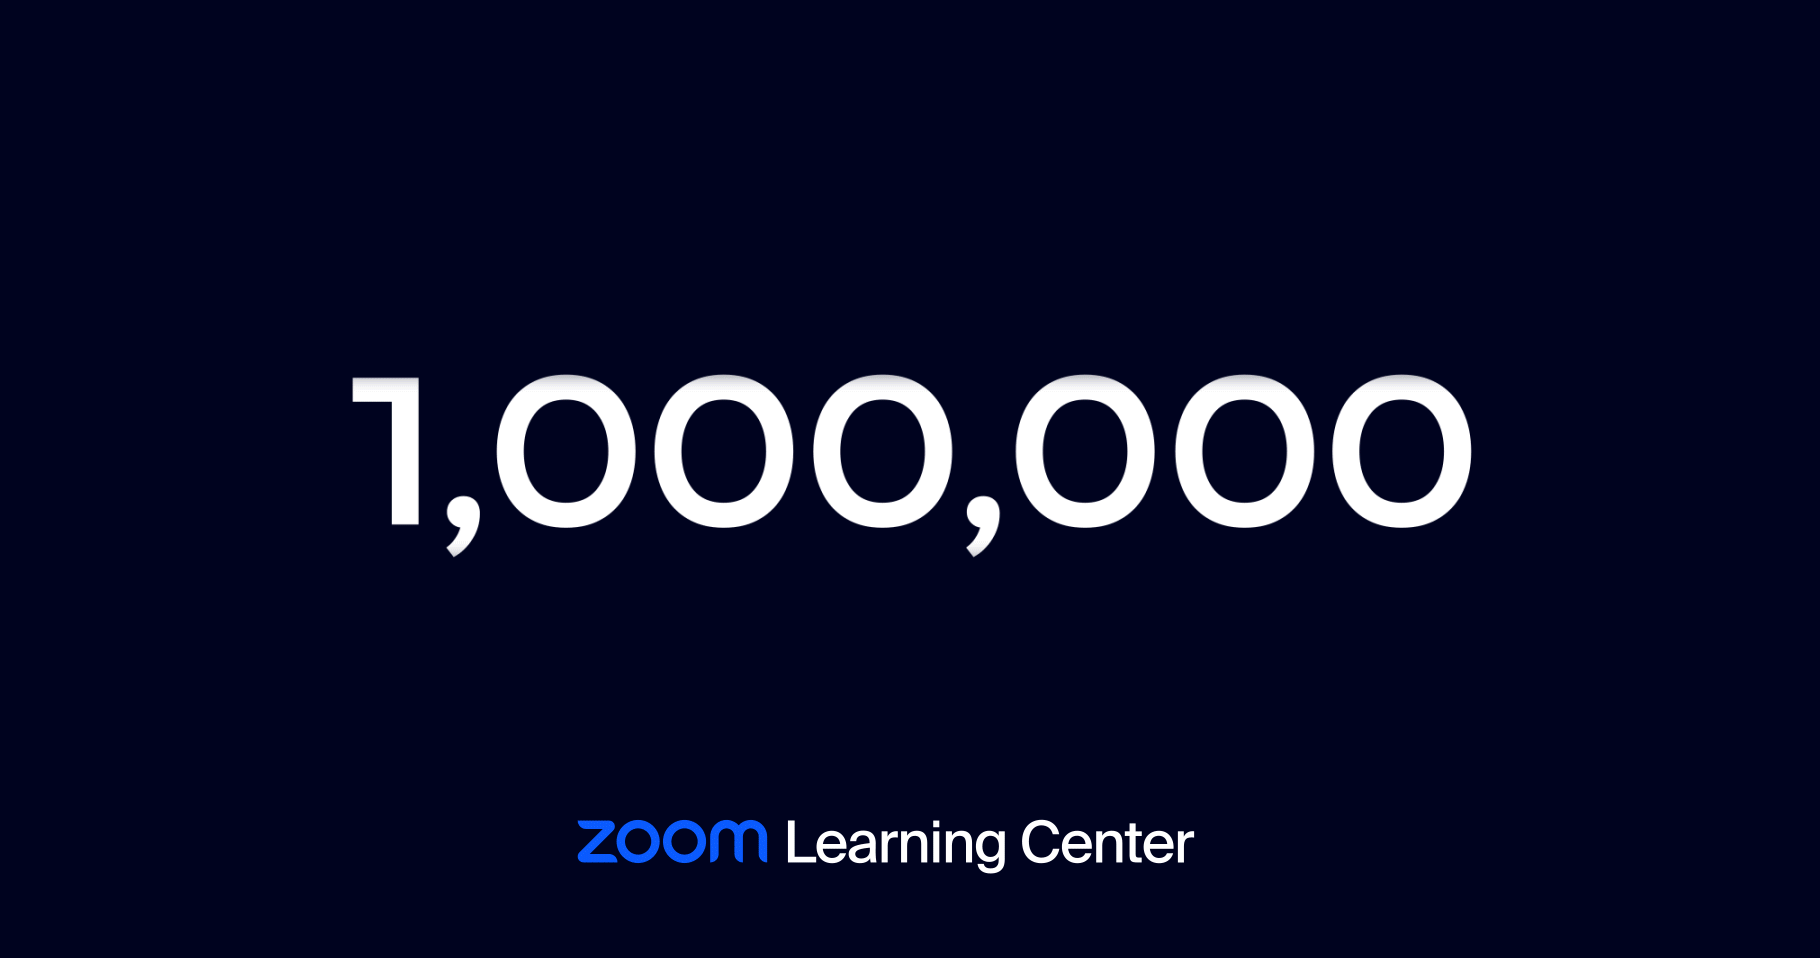 1 Year, 1 Million Users In The Zoom Learning Center